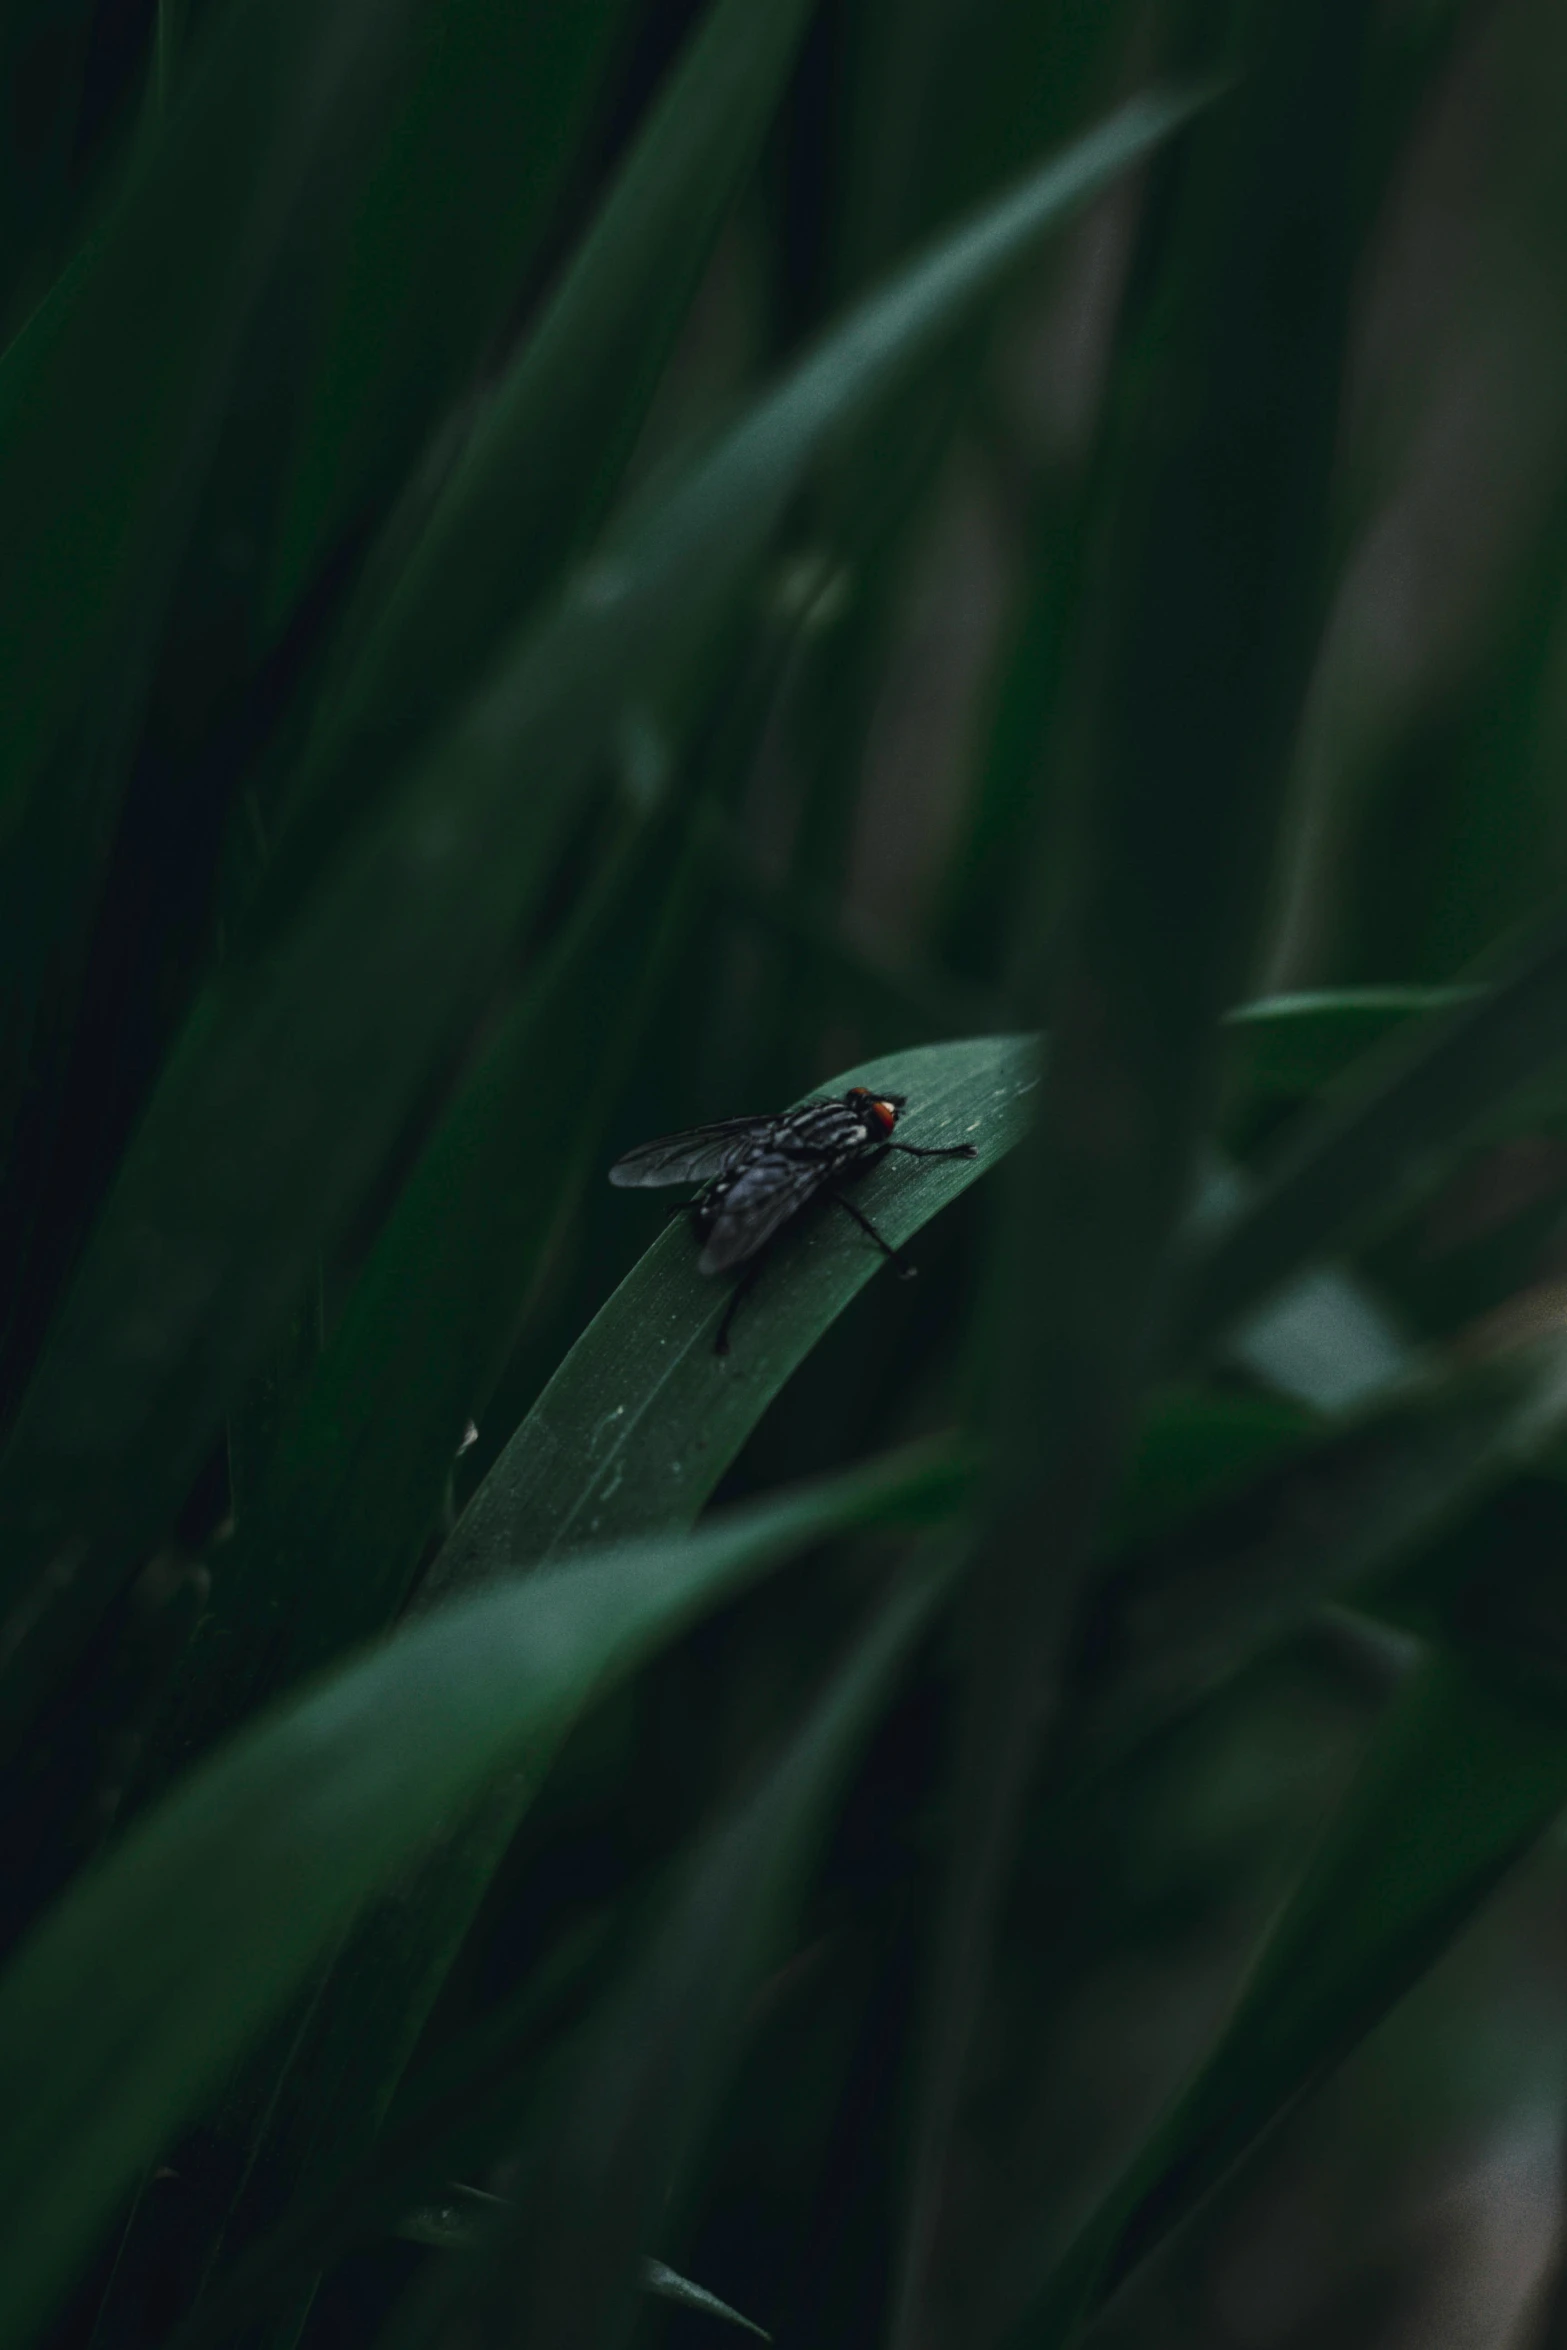 a fly on top of a leaf, in a grassy area